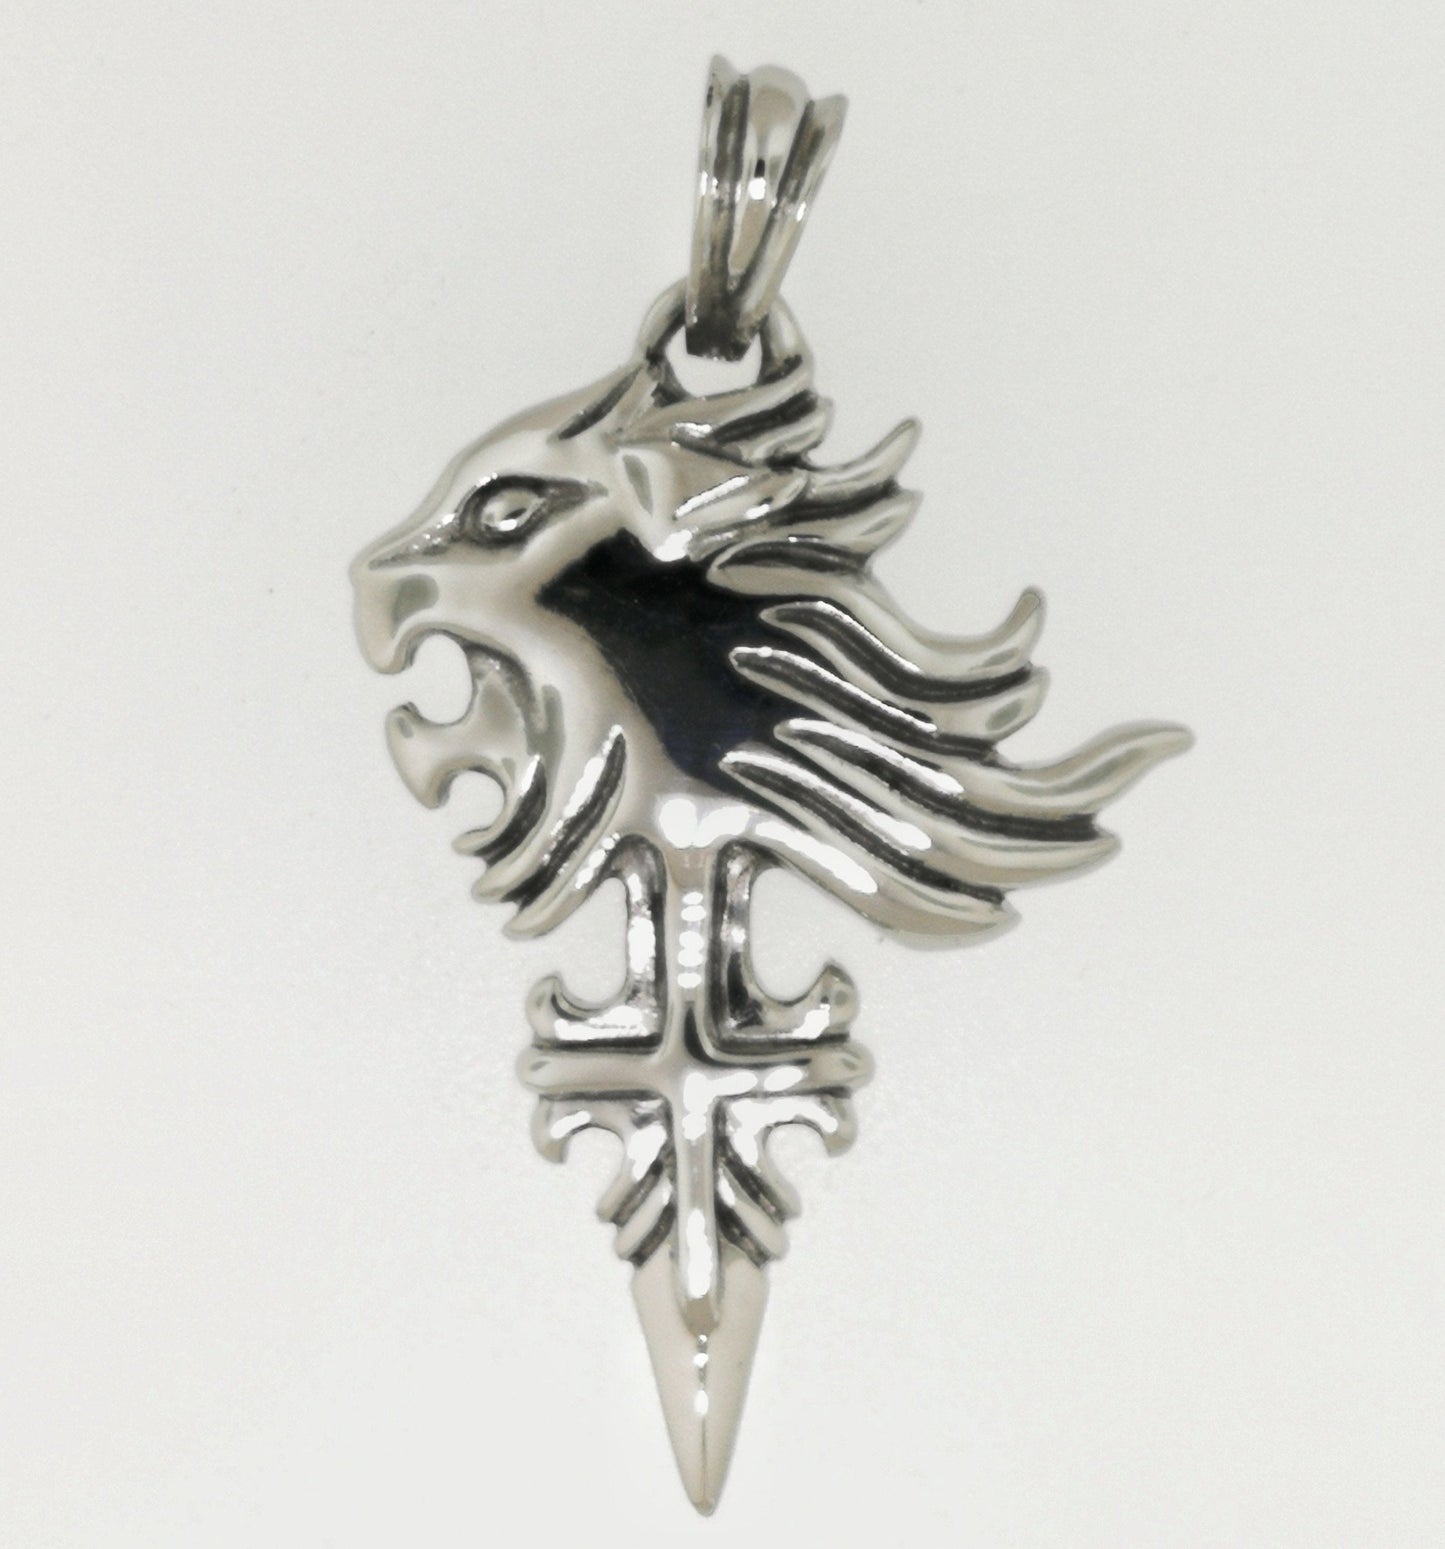 Final Fantasy 8 Squall Griever Pendant Version 2 in Stainless Steel, FF8 Sleeping Lion Pendant, Final Fantasy VIII Pendant, stainless steel gamer pendant, stainless steel griever pendant, final fantasy jewelry, gamer pendant stainless steel